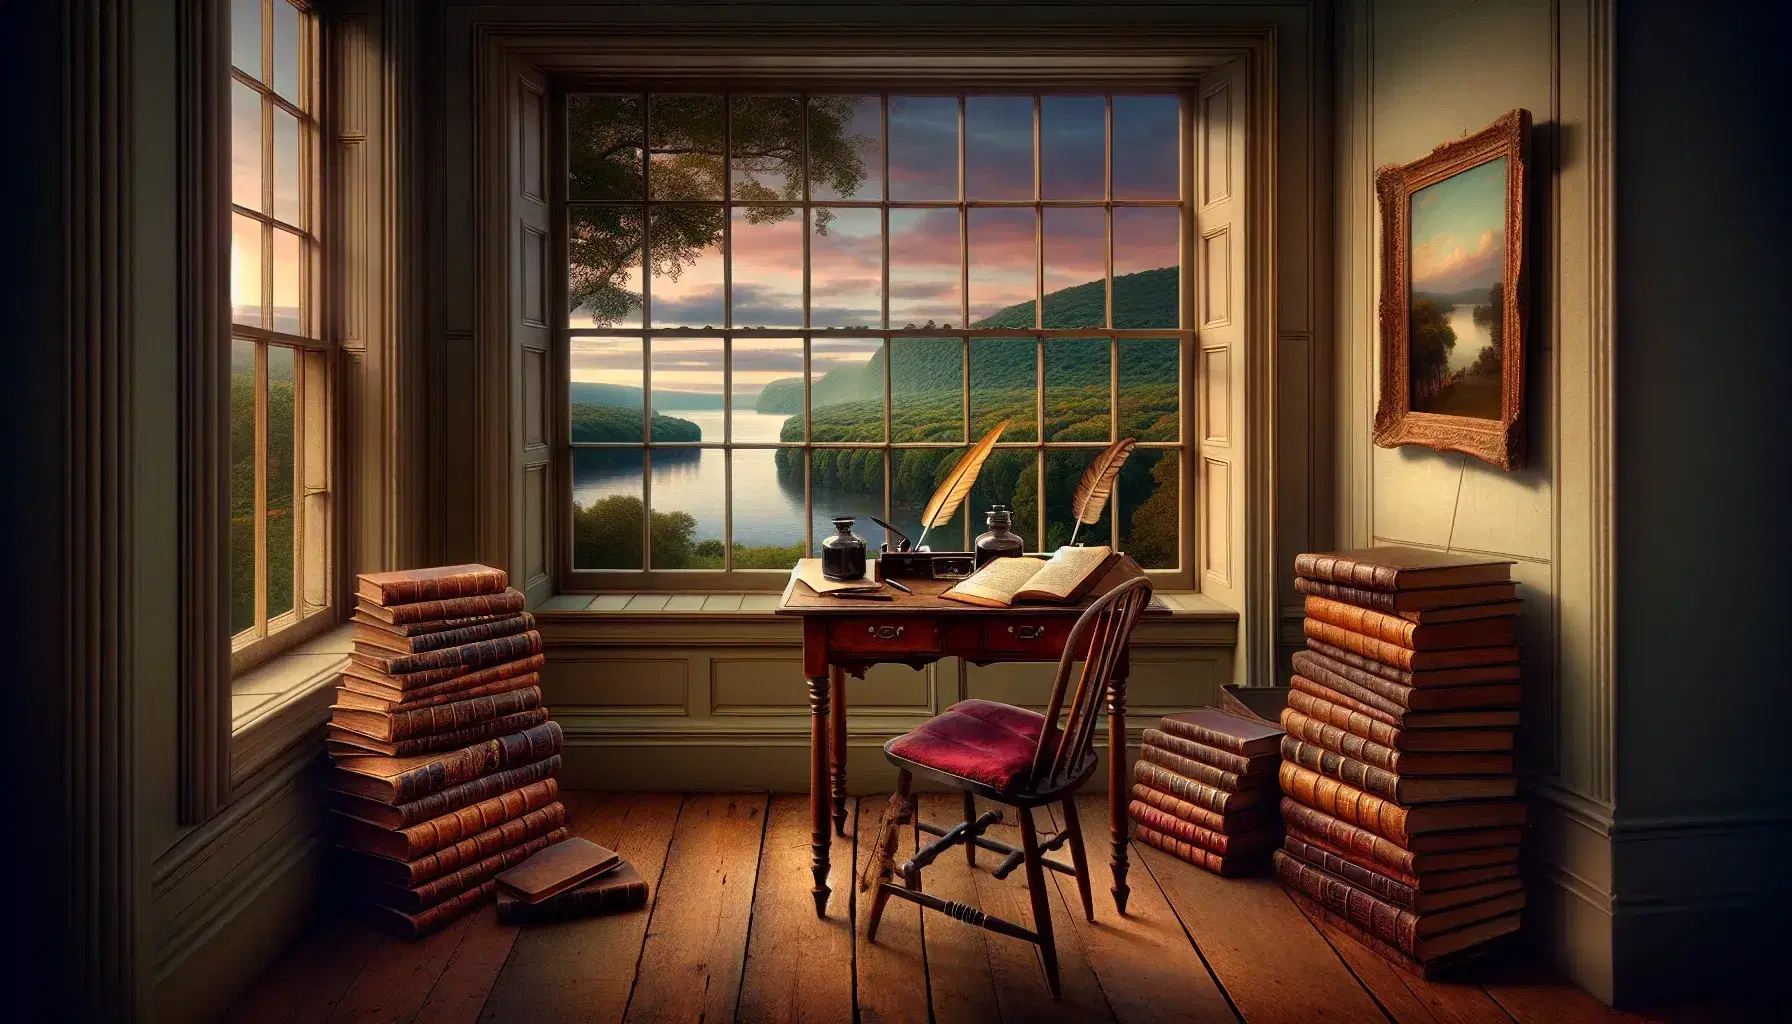 Early 19th-century inspired study with a wooden desk, quill pen, inkwell, and leather books, overlooking a Hudson Valley-like landscape at twilight.